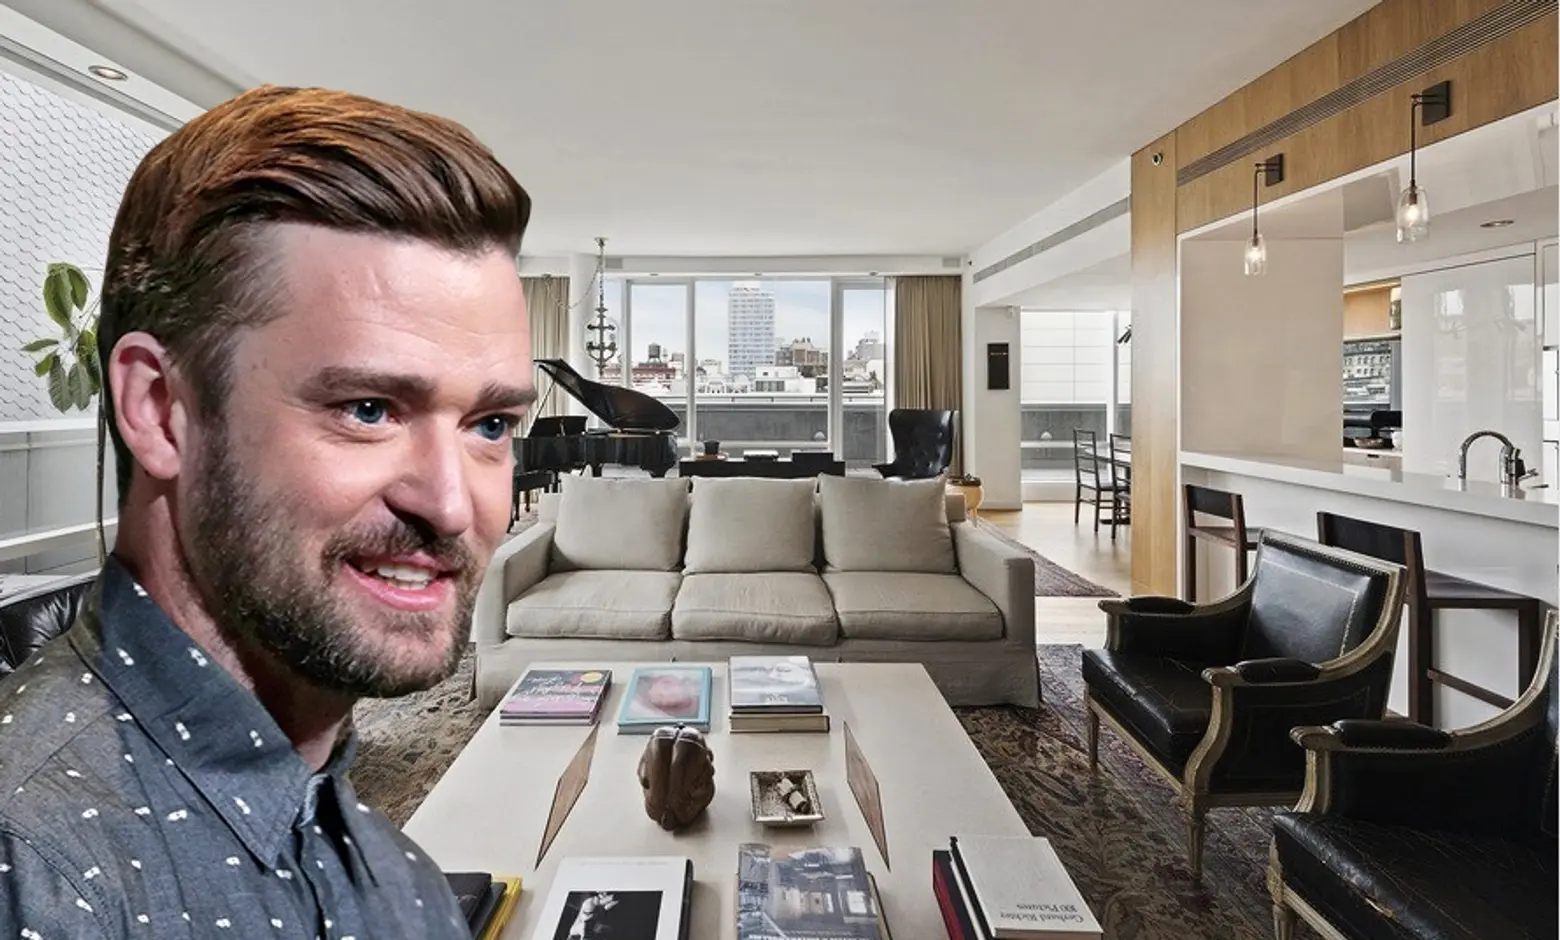 Justin Timberlake wants to offload his sleek Soho Mews penthouse for $8M